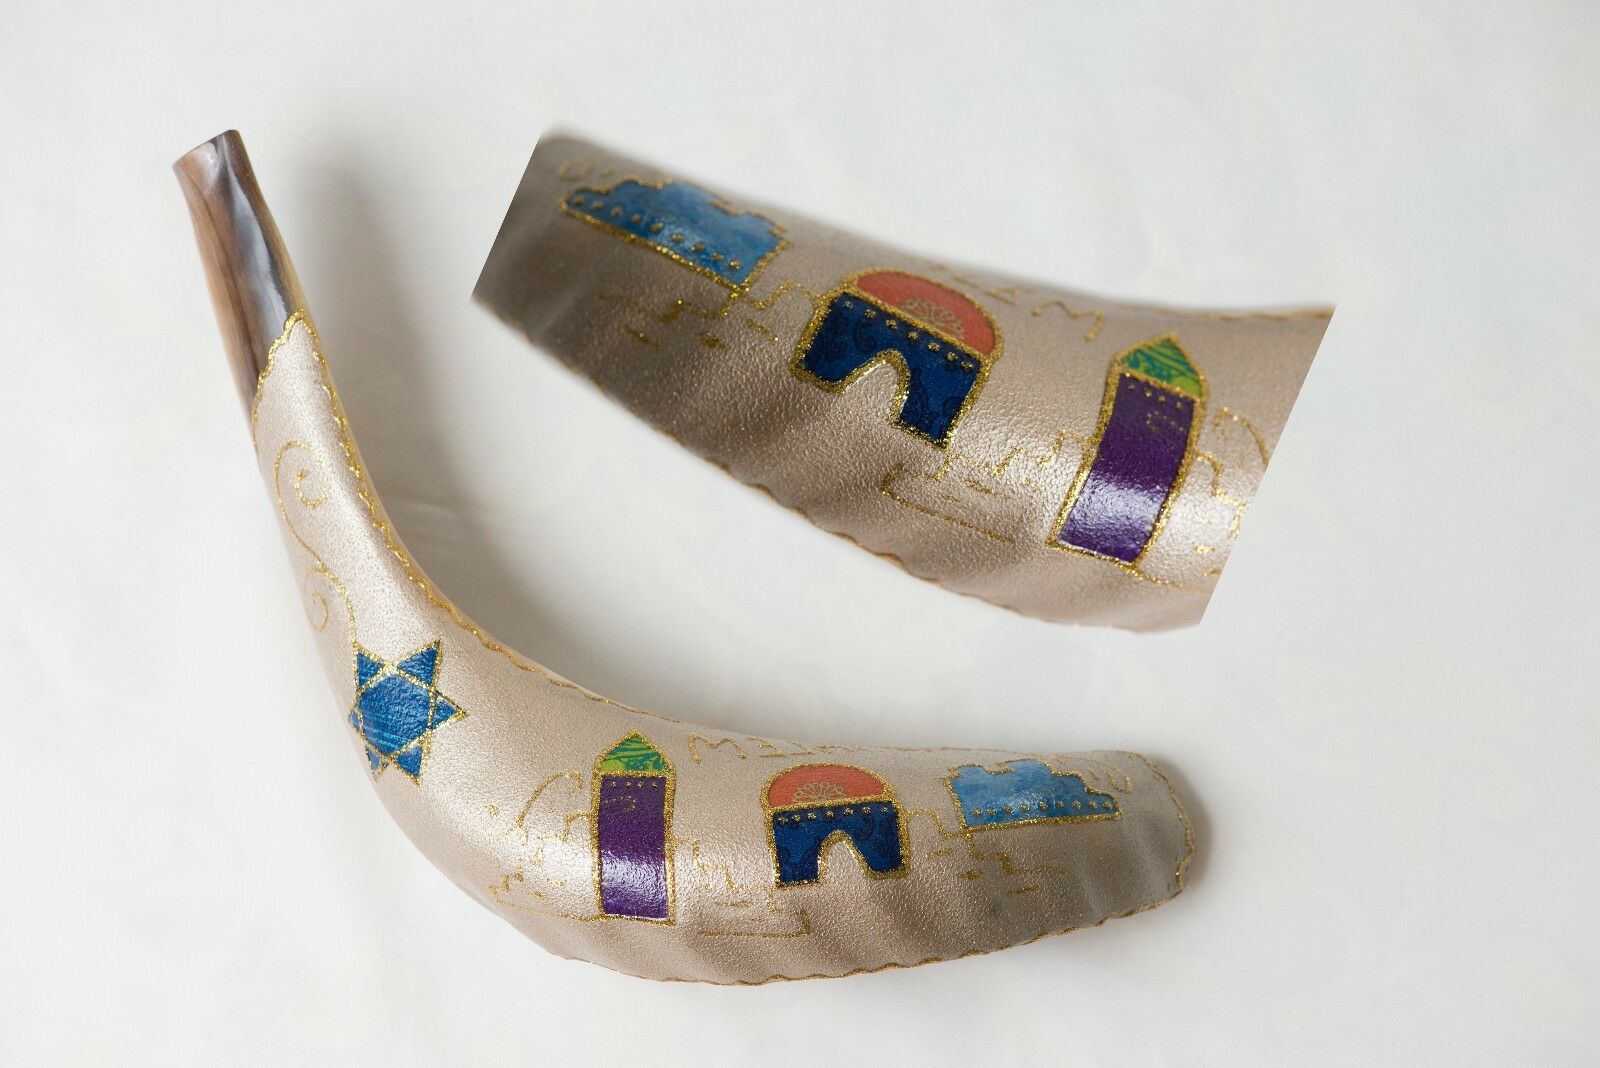 15"-17" Painted Ram's Horn Shofar With Multi-color Jerusalem And A Star Of David